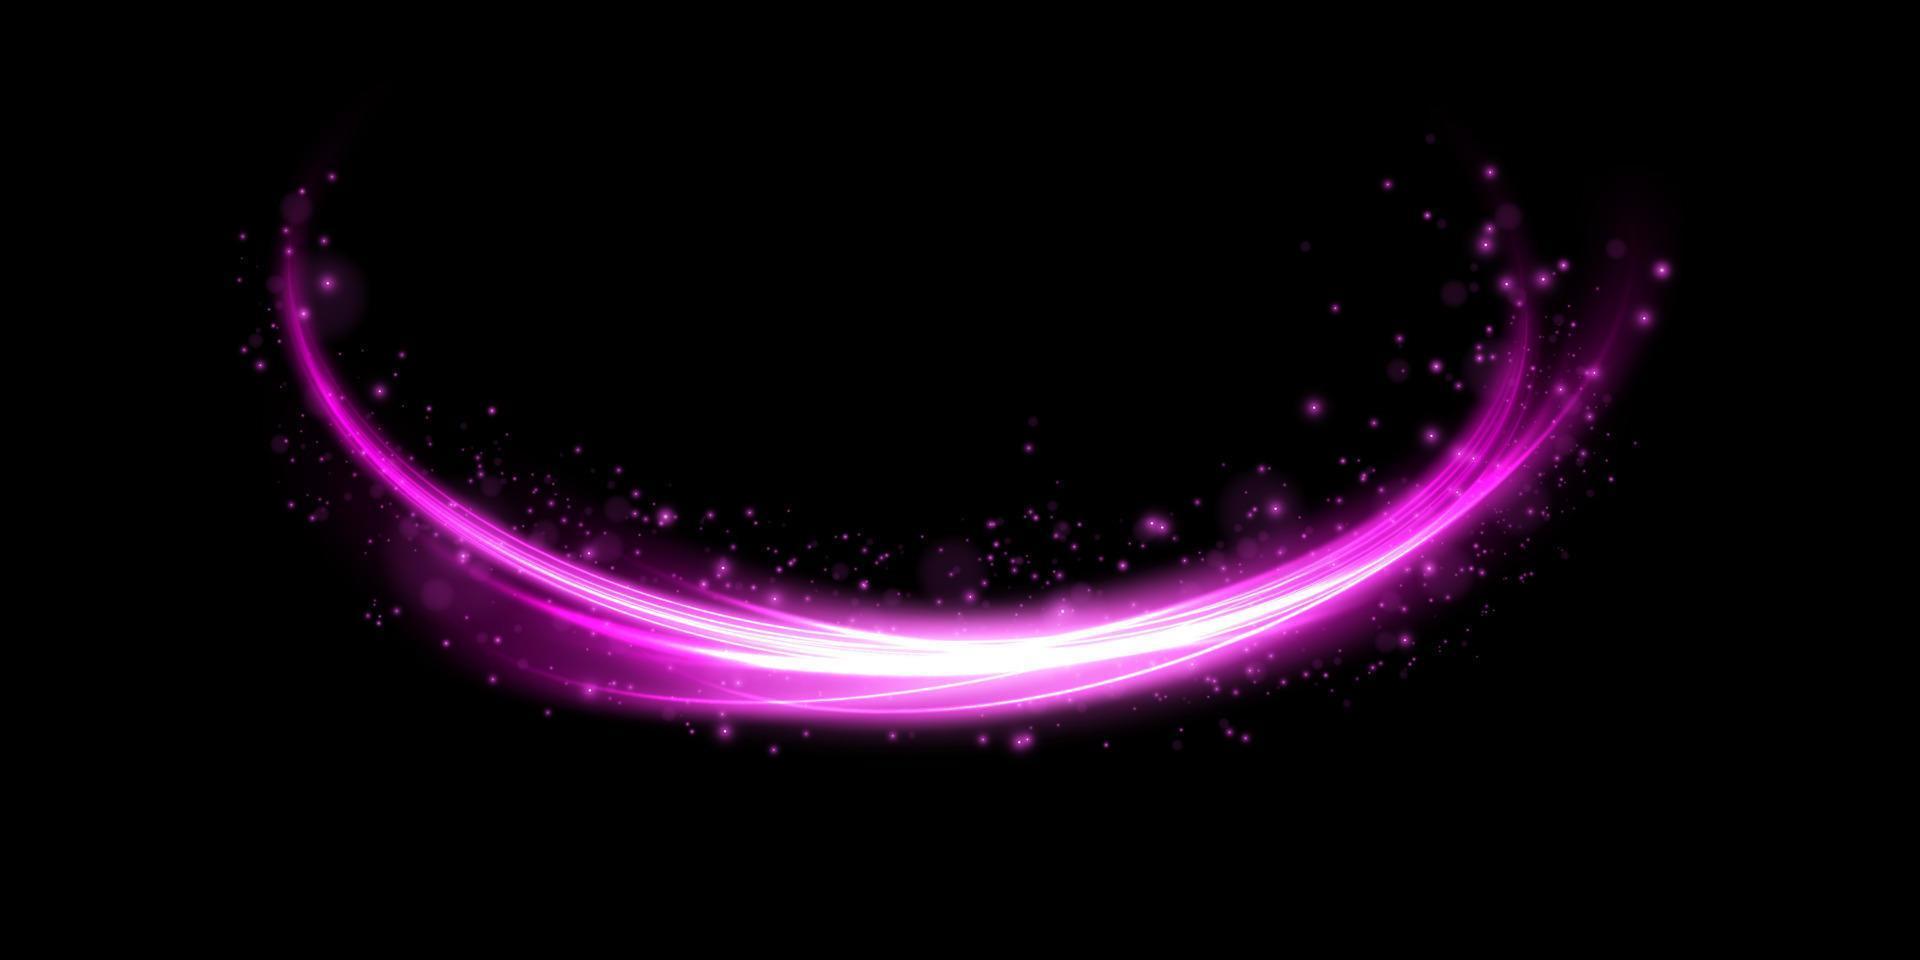 Abstract light lines of movement and speed in purple. Light everyday glowing effect. semicircular wave, light trail curve swirl, car headlights, incandescent optical fiber png. vector